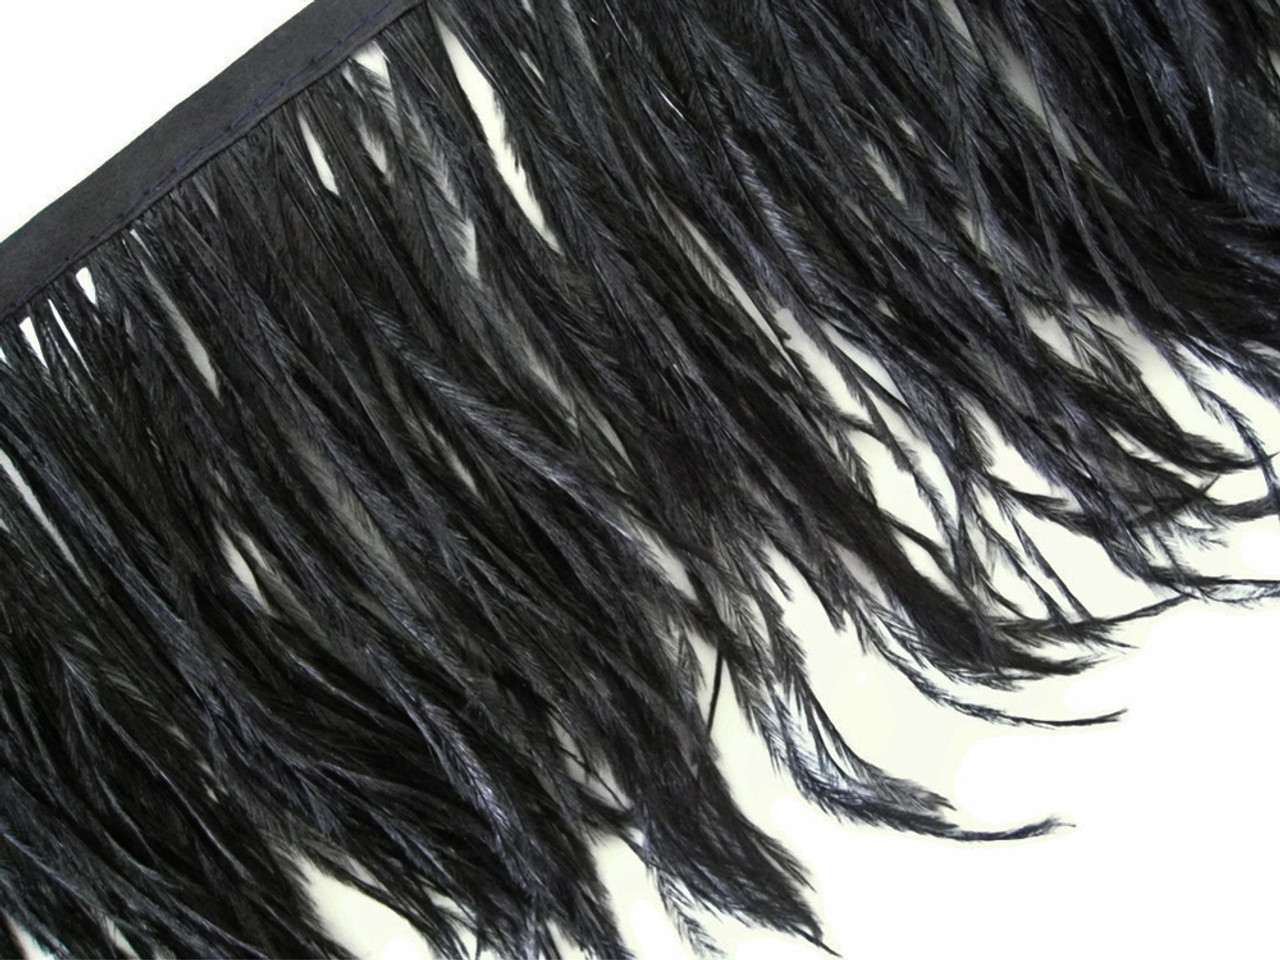  THARAHT Black Ostrich Feathers Trim Sewing Fringe